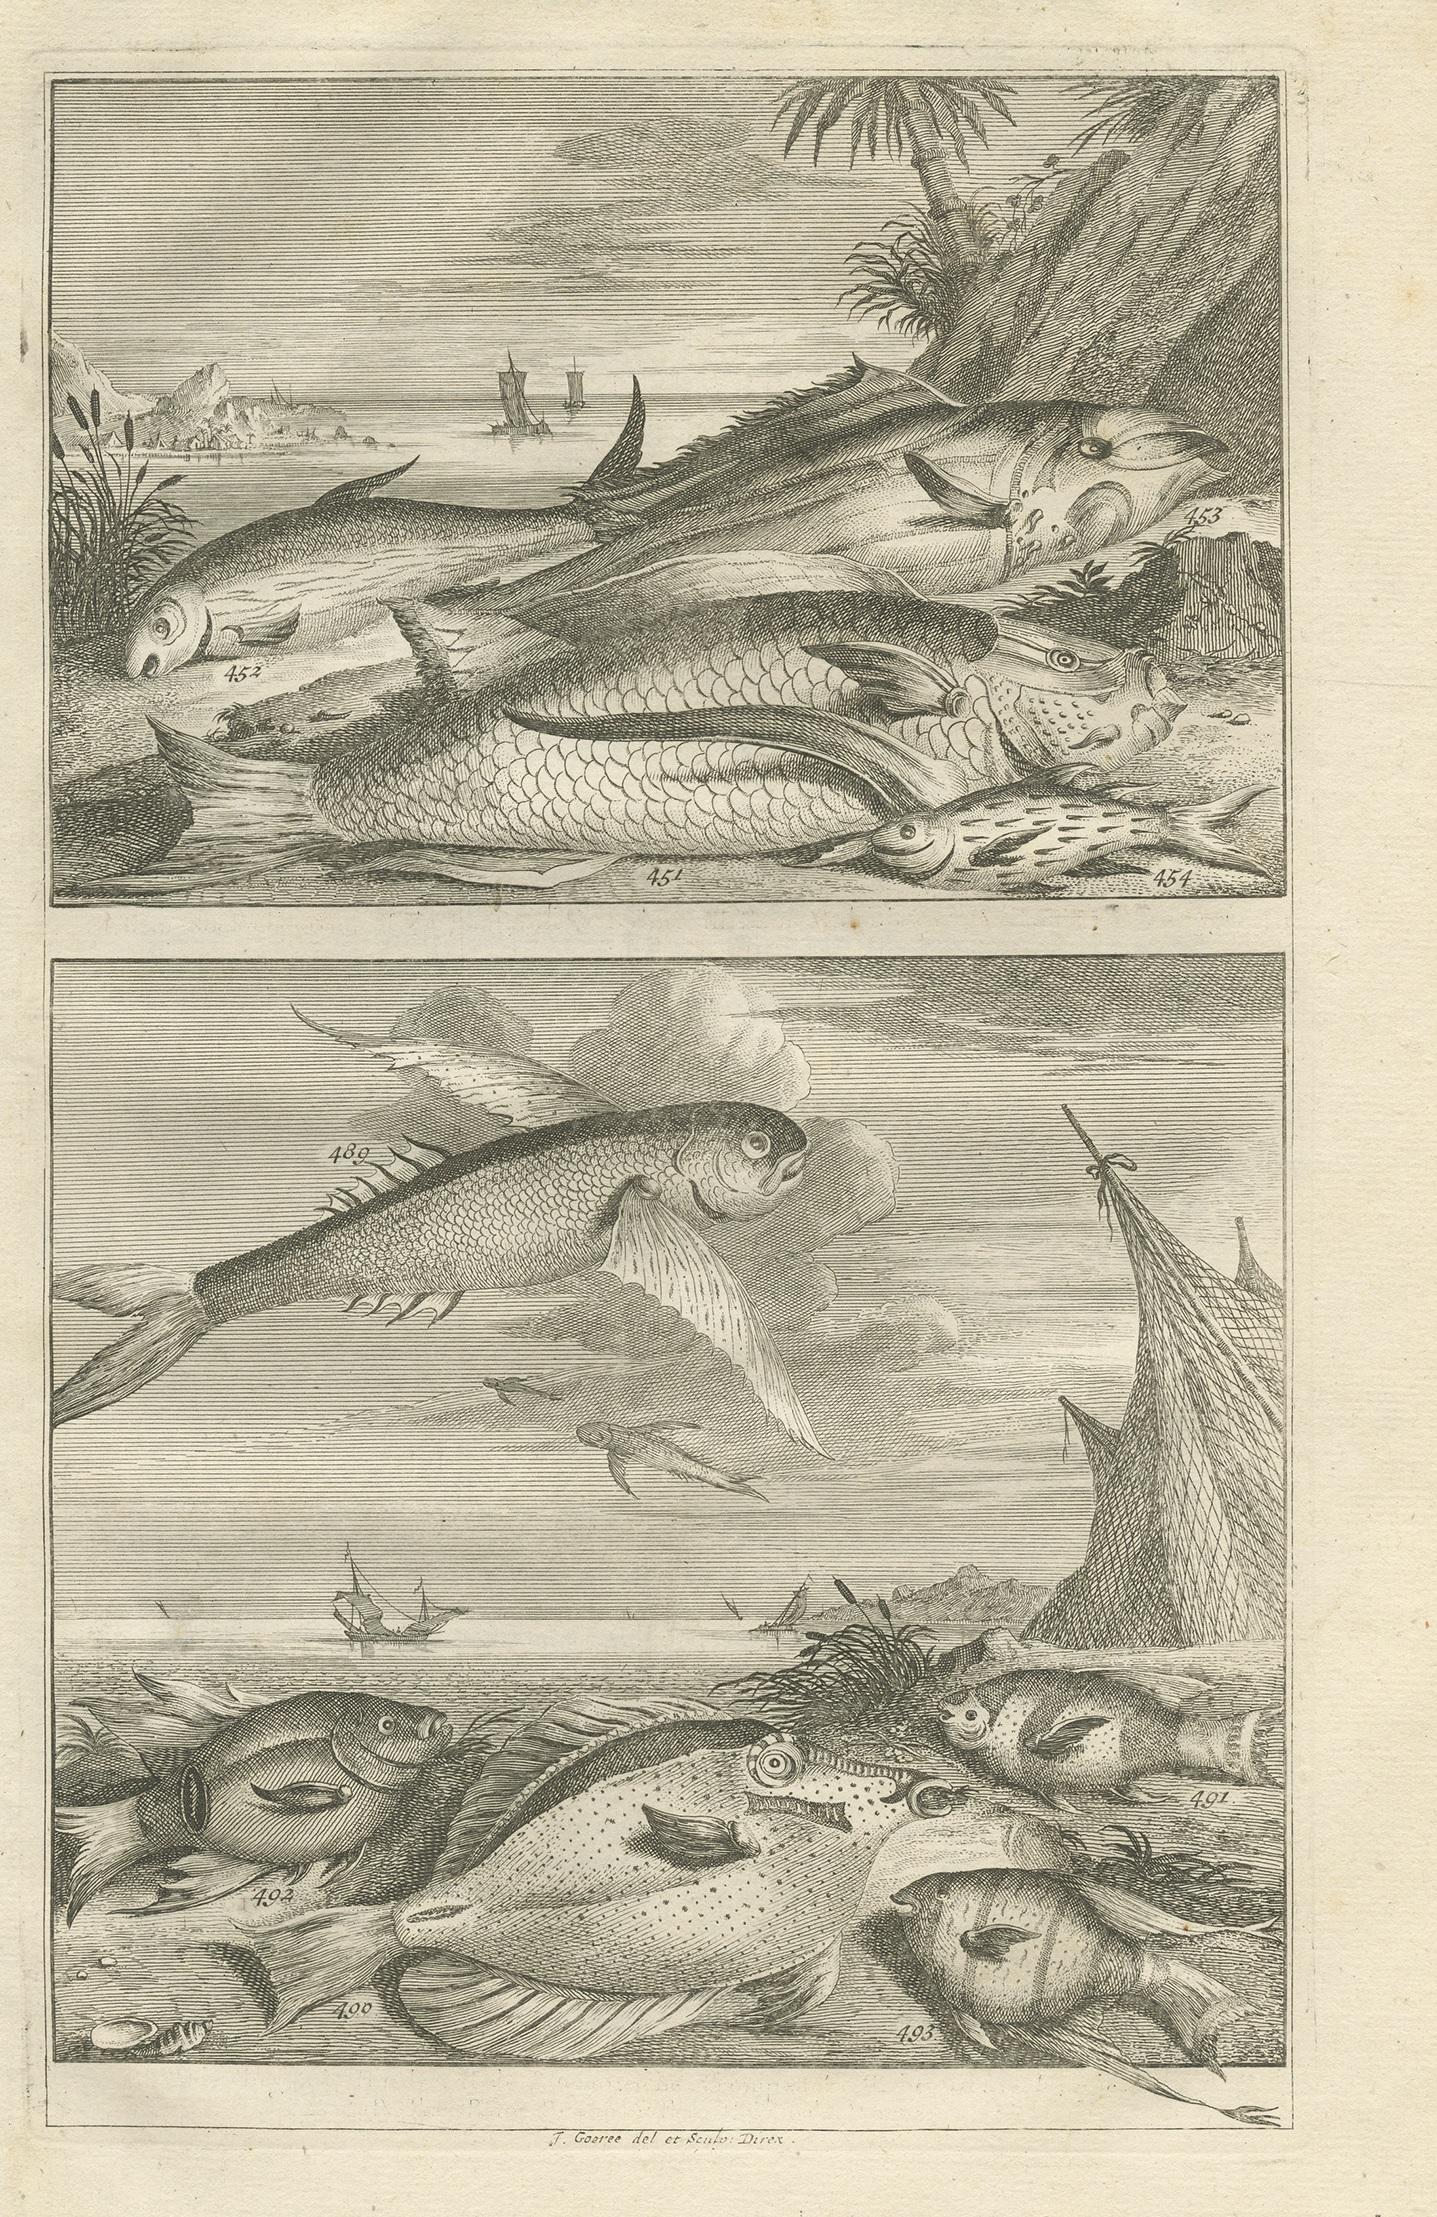 Untitled print of various fish species from Indonesia. This print originates from 'Oud en Nieuw Oost-Indiën' by F. Valentijn.